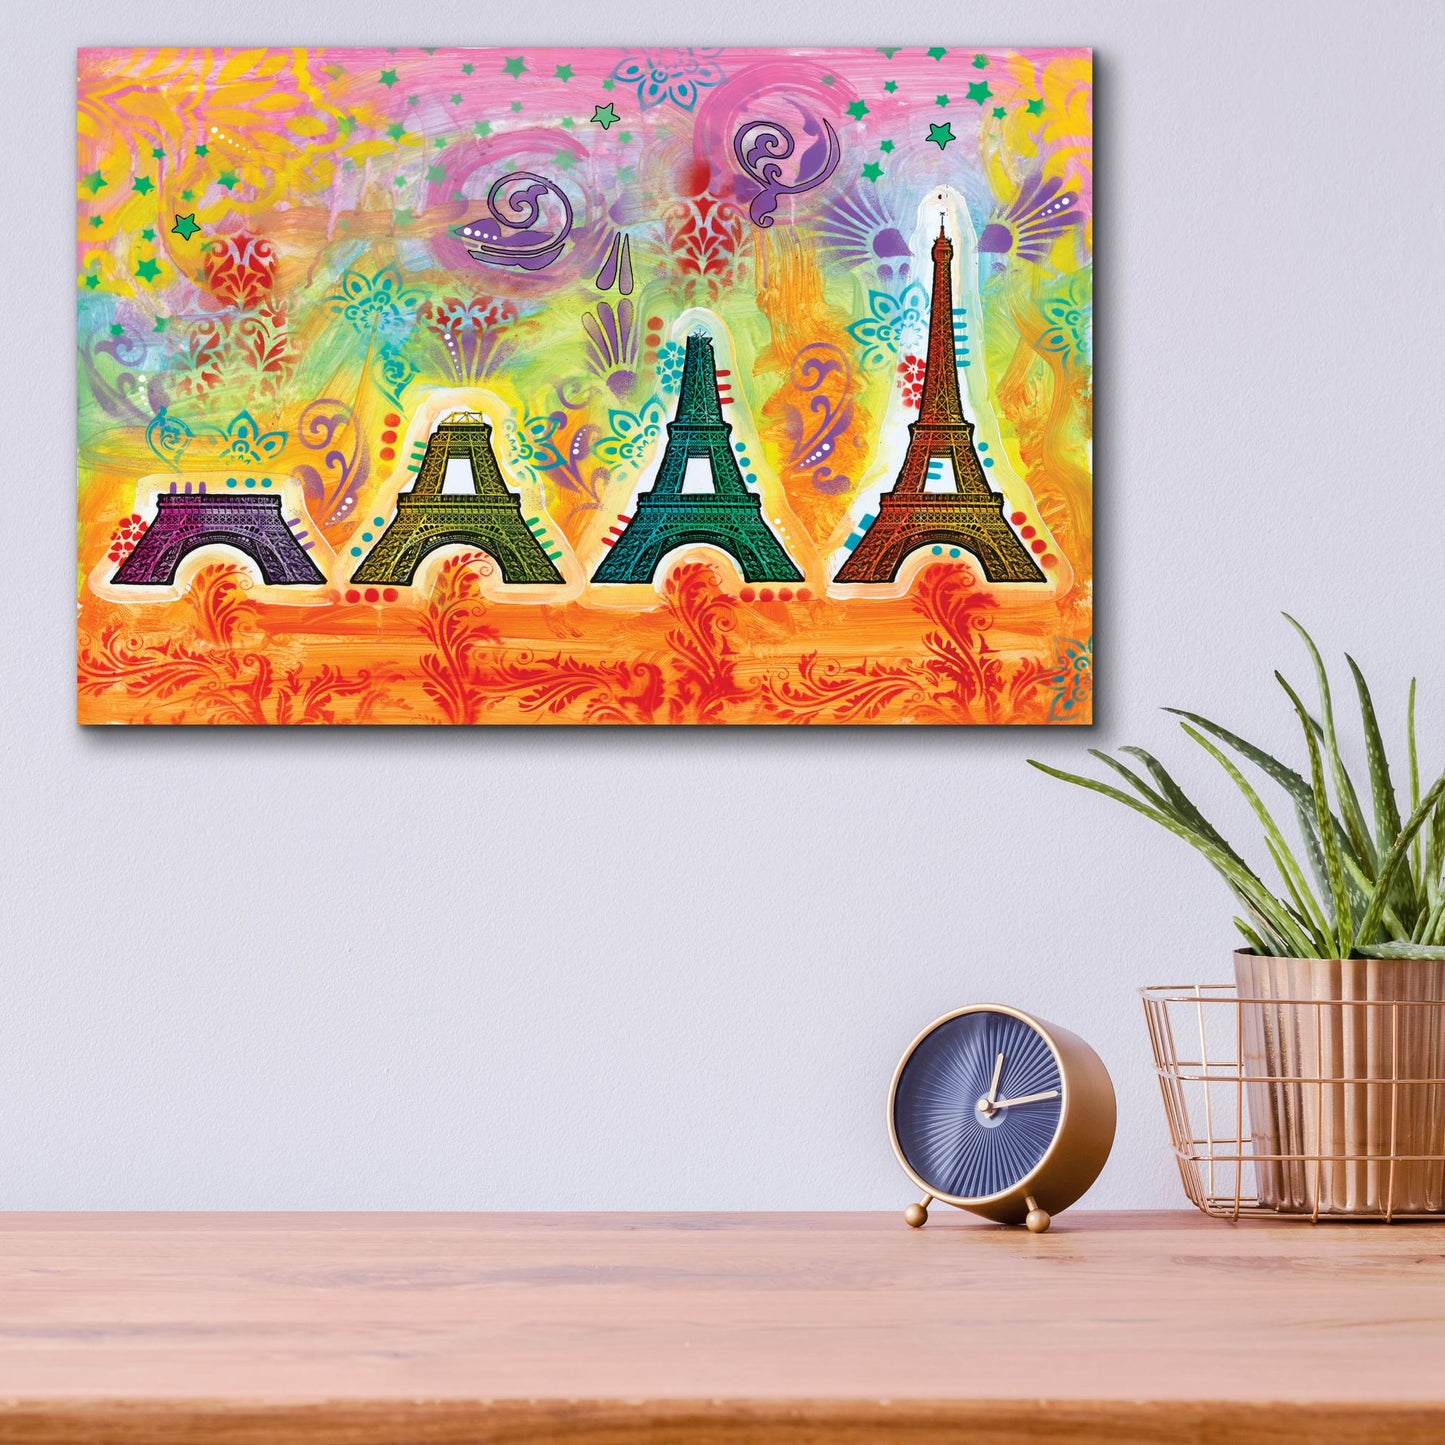 Epic Art 'Construction of the Eiffel Tower' by Dean Russo, Acrylic Glass Wall Art,16x12